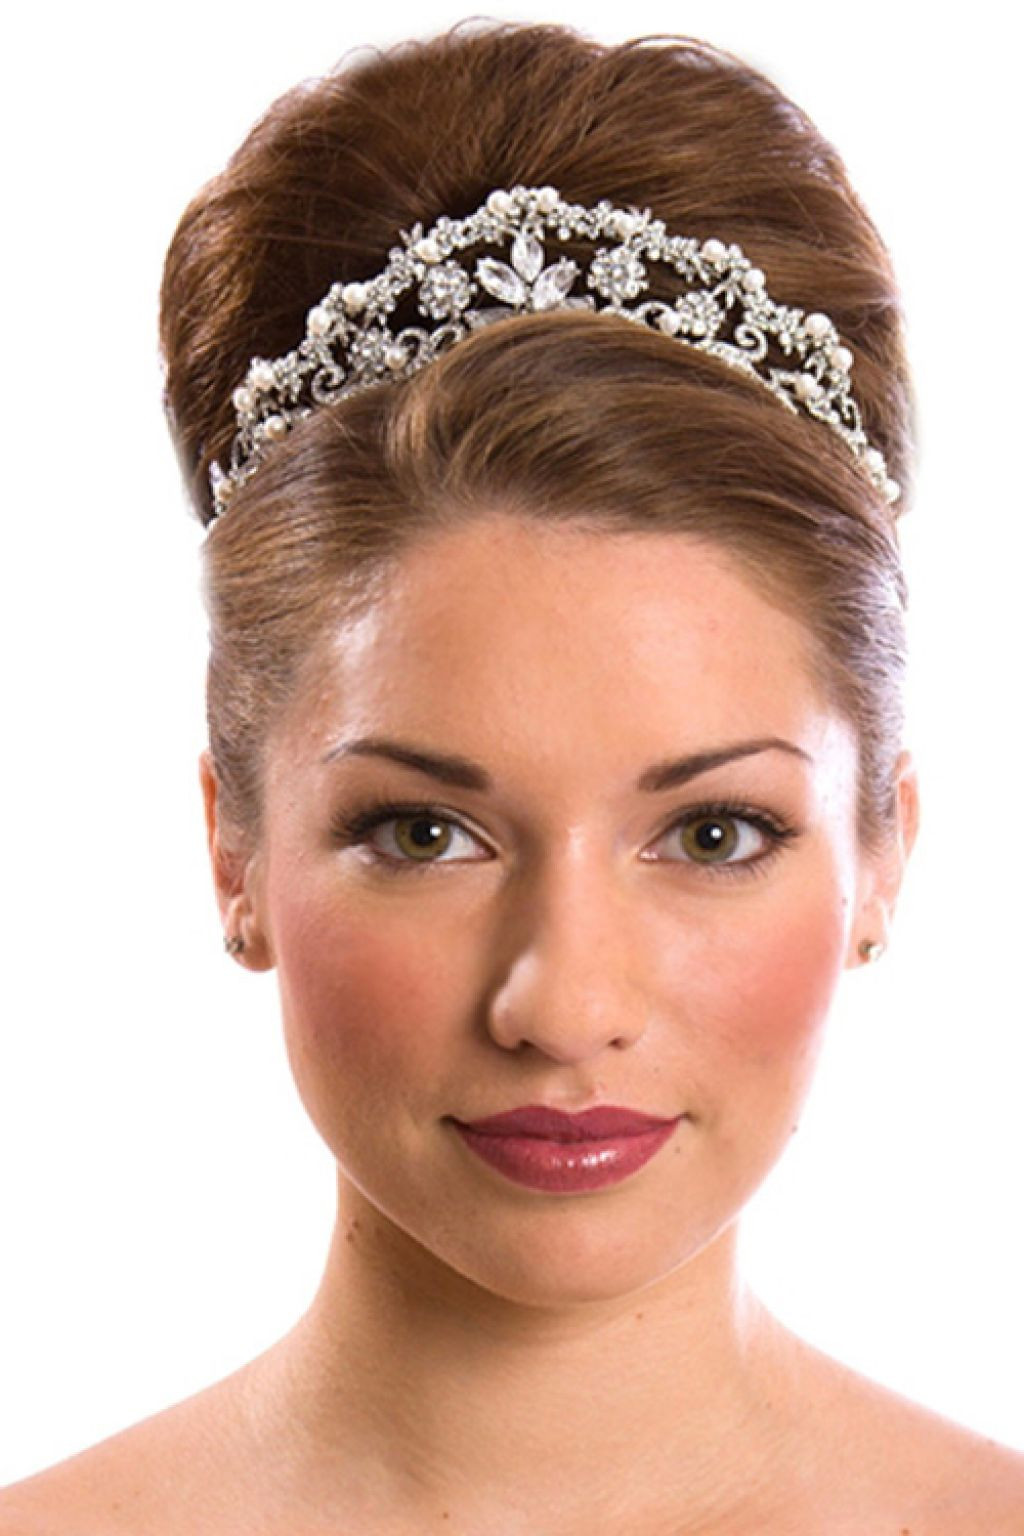 Wedding Hairstyles For Tiaras
 Top 10 Wedding Hairstyles for 2015